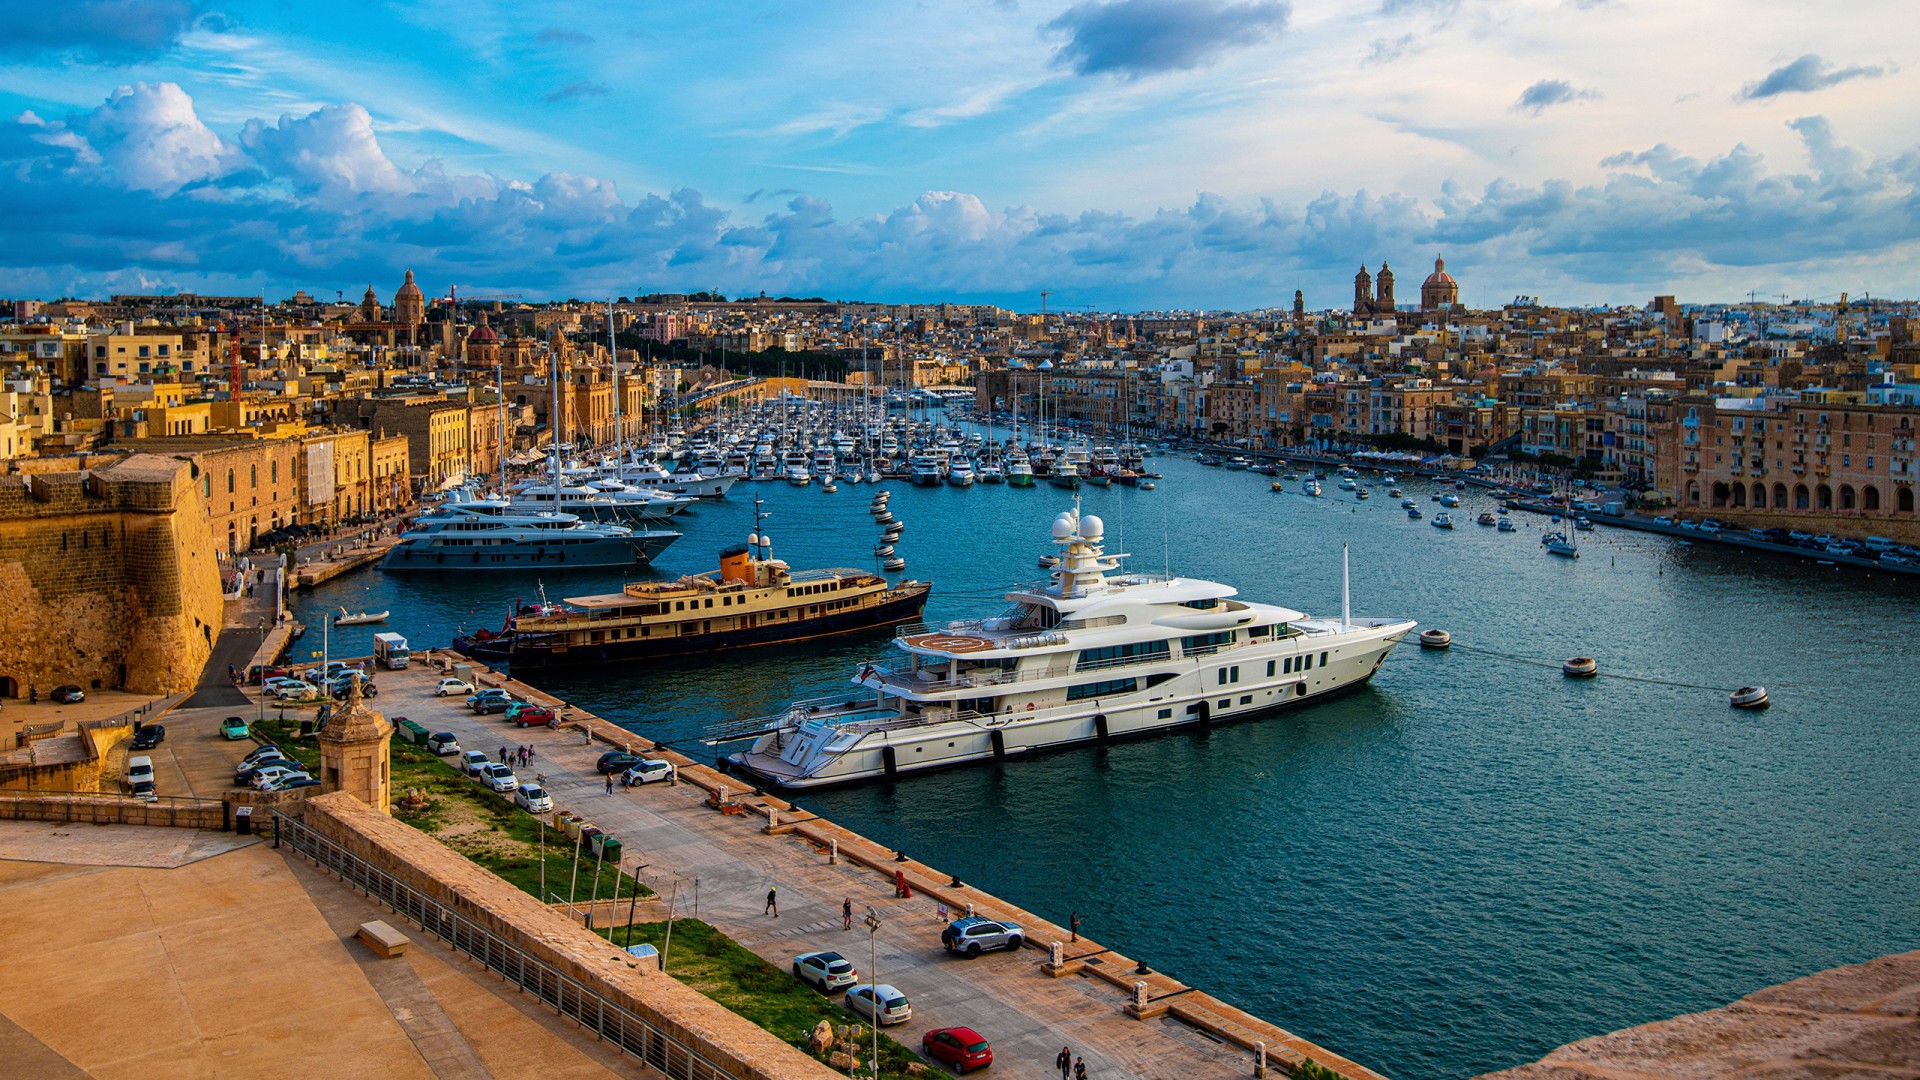 Company Formation in Malta: Requirements and Process Explained